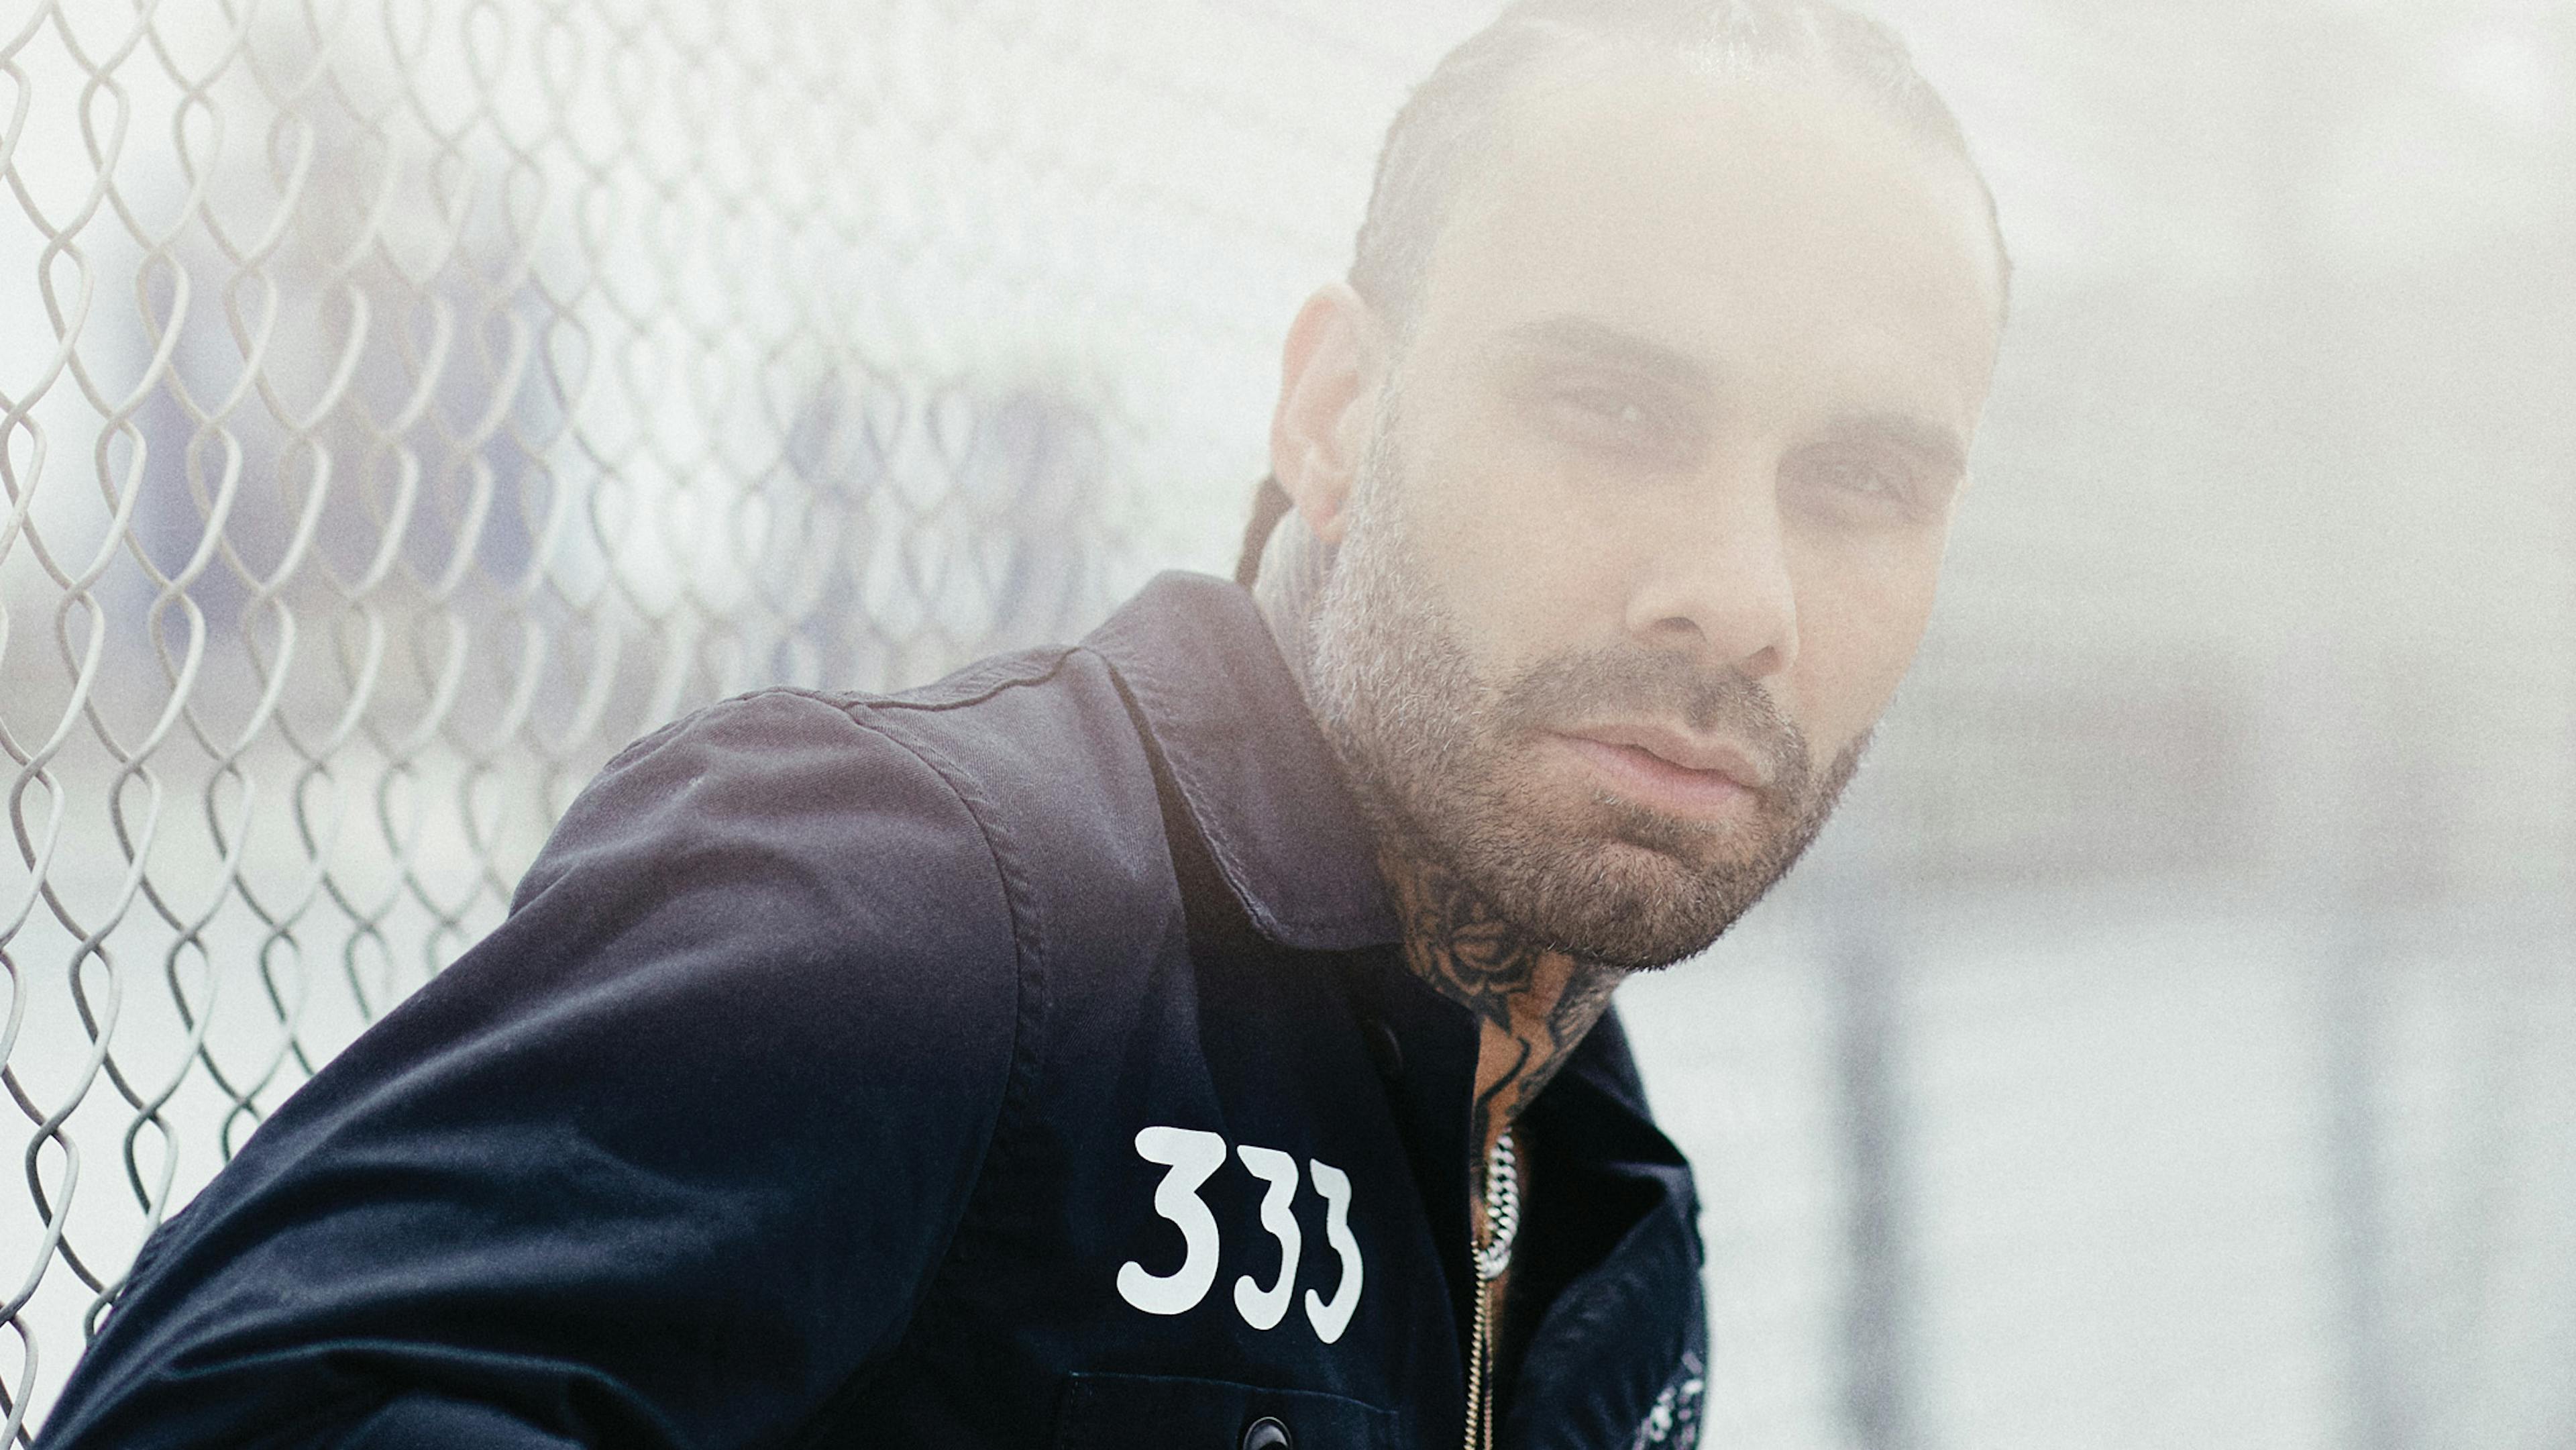 Jason Aalon Butler: "We Have A F*cking Problem. People Are Dying En Masse, Kids Are Going To School And Killing Their Peers... We Need To Find A Solution"